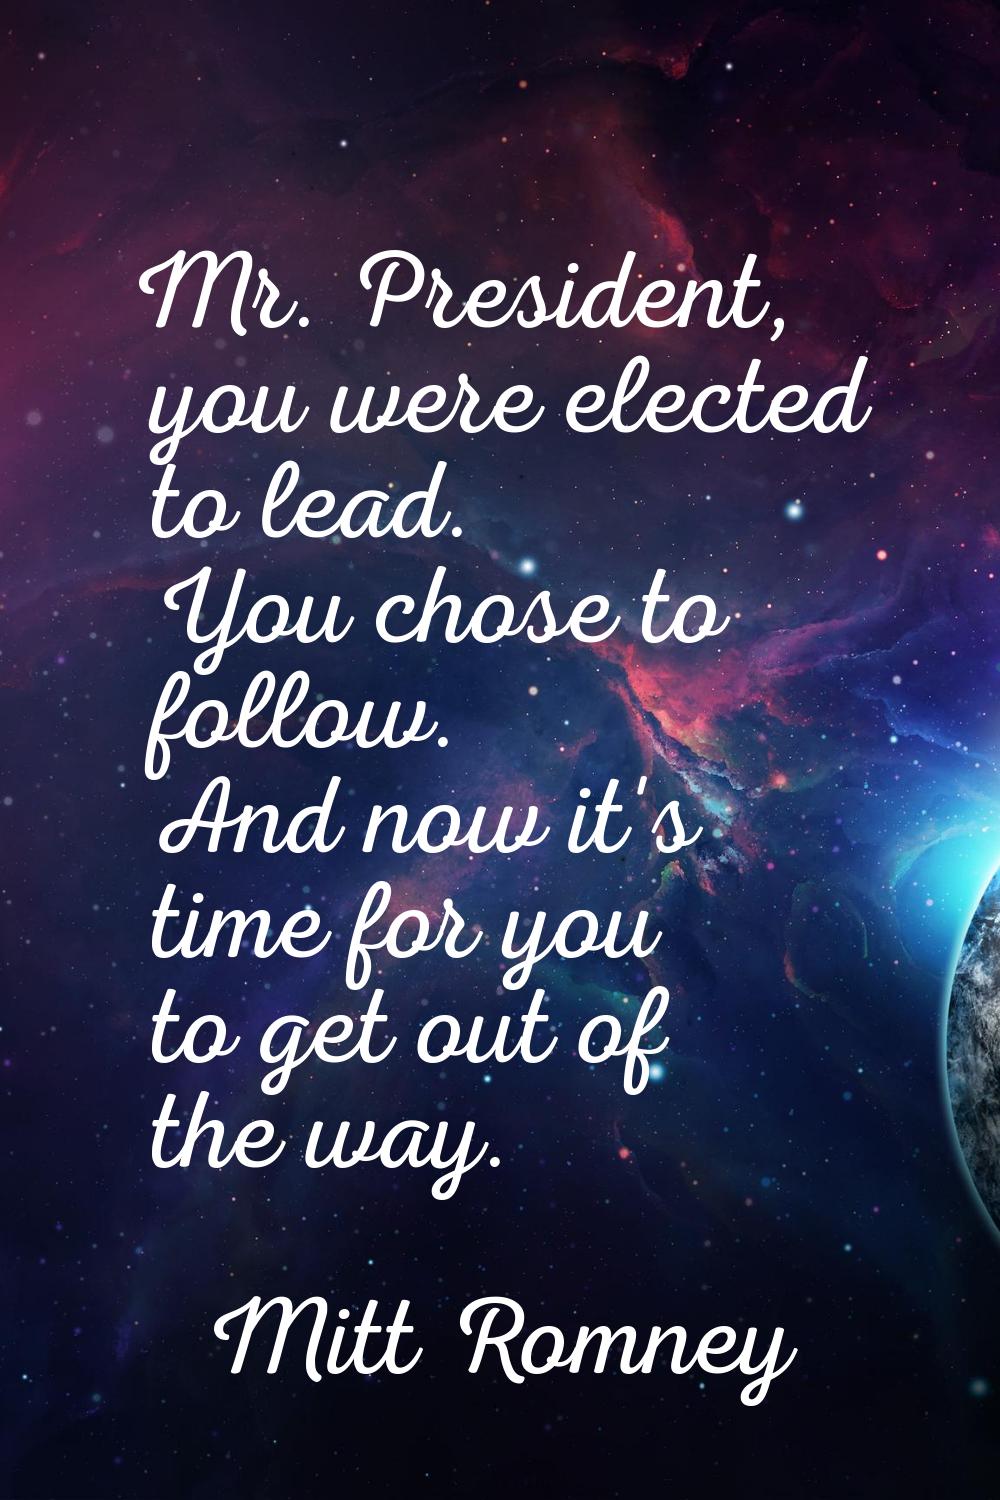 Mr. President, you were elected to lead. You chose to follow. And now it's time for you to get out 